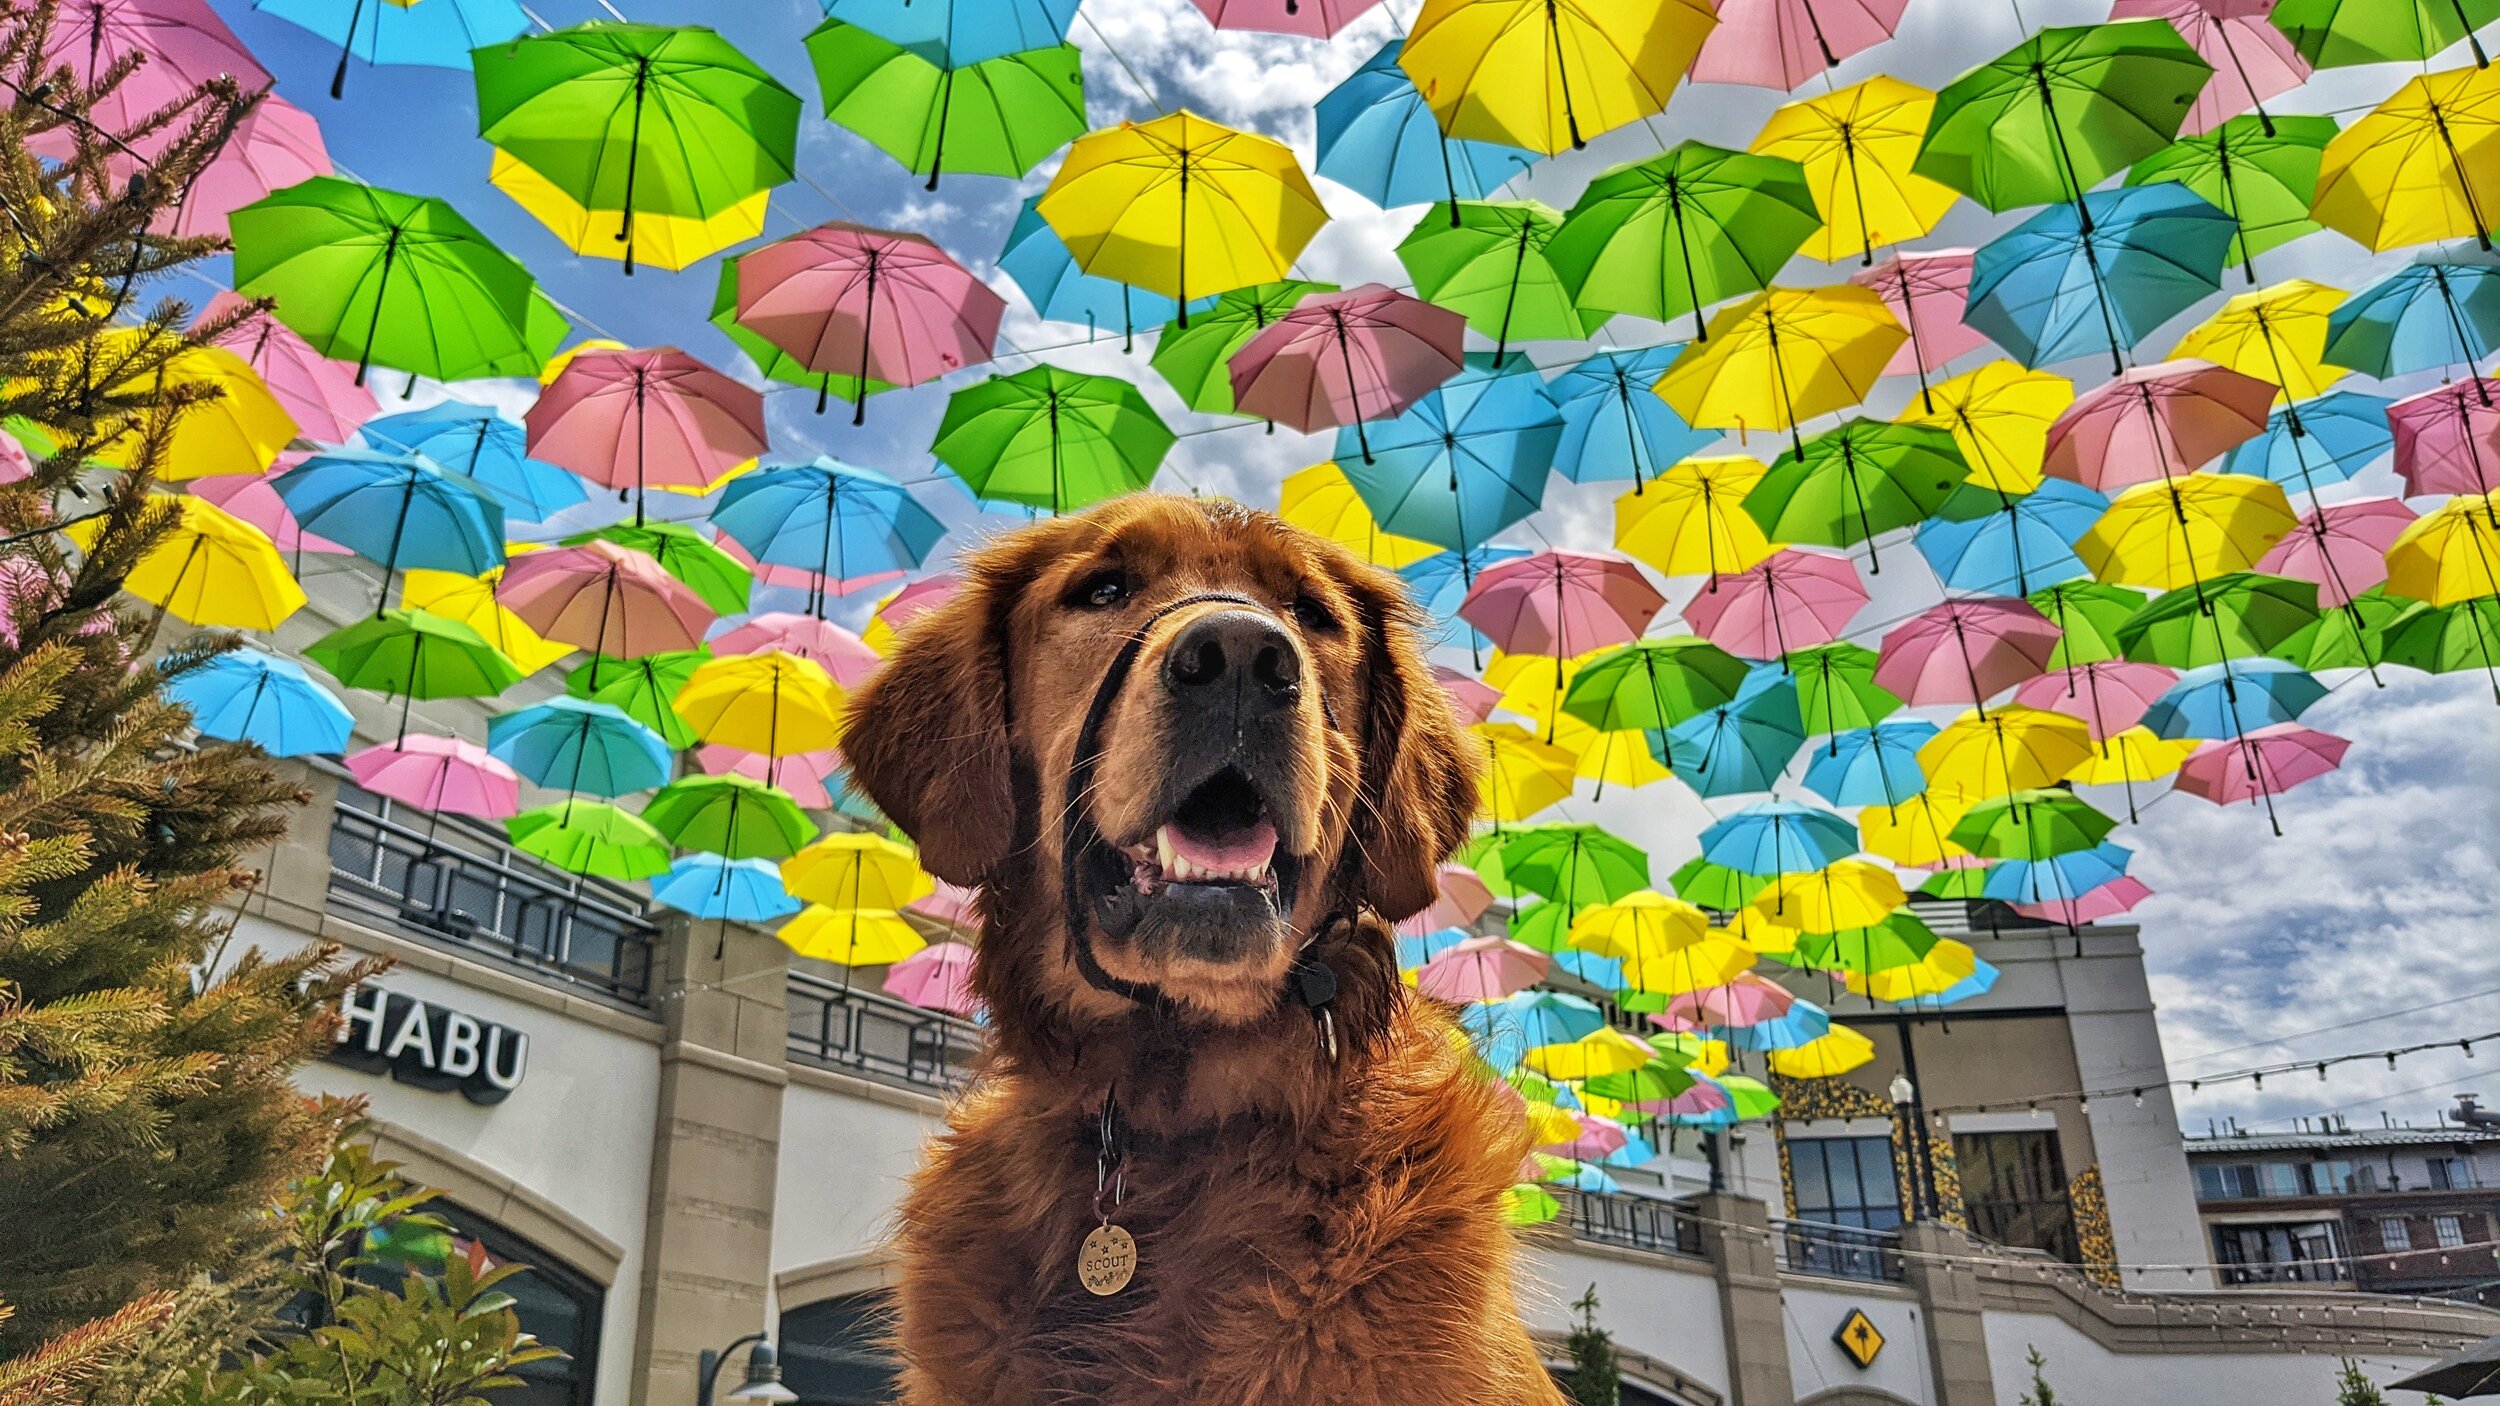 Golden retriever Scout sits below a hanging outdoor art display featuring colorful hanging umbrellas